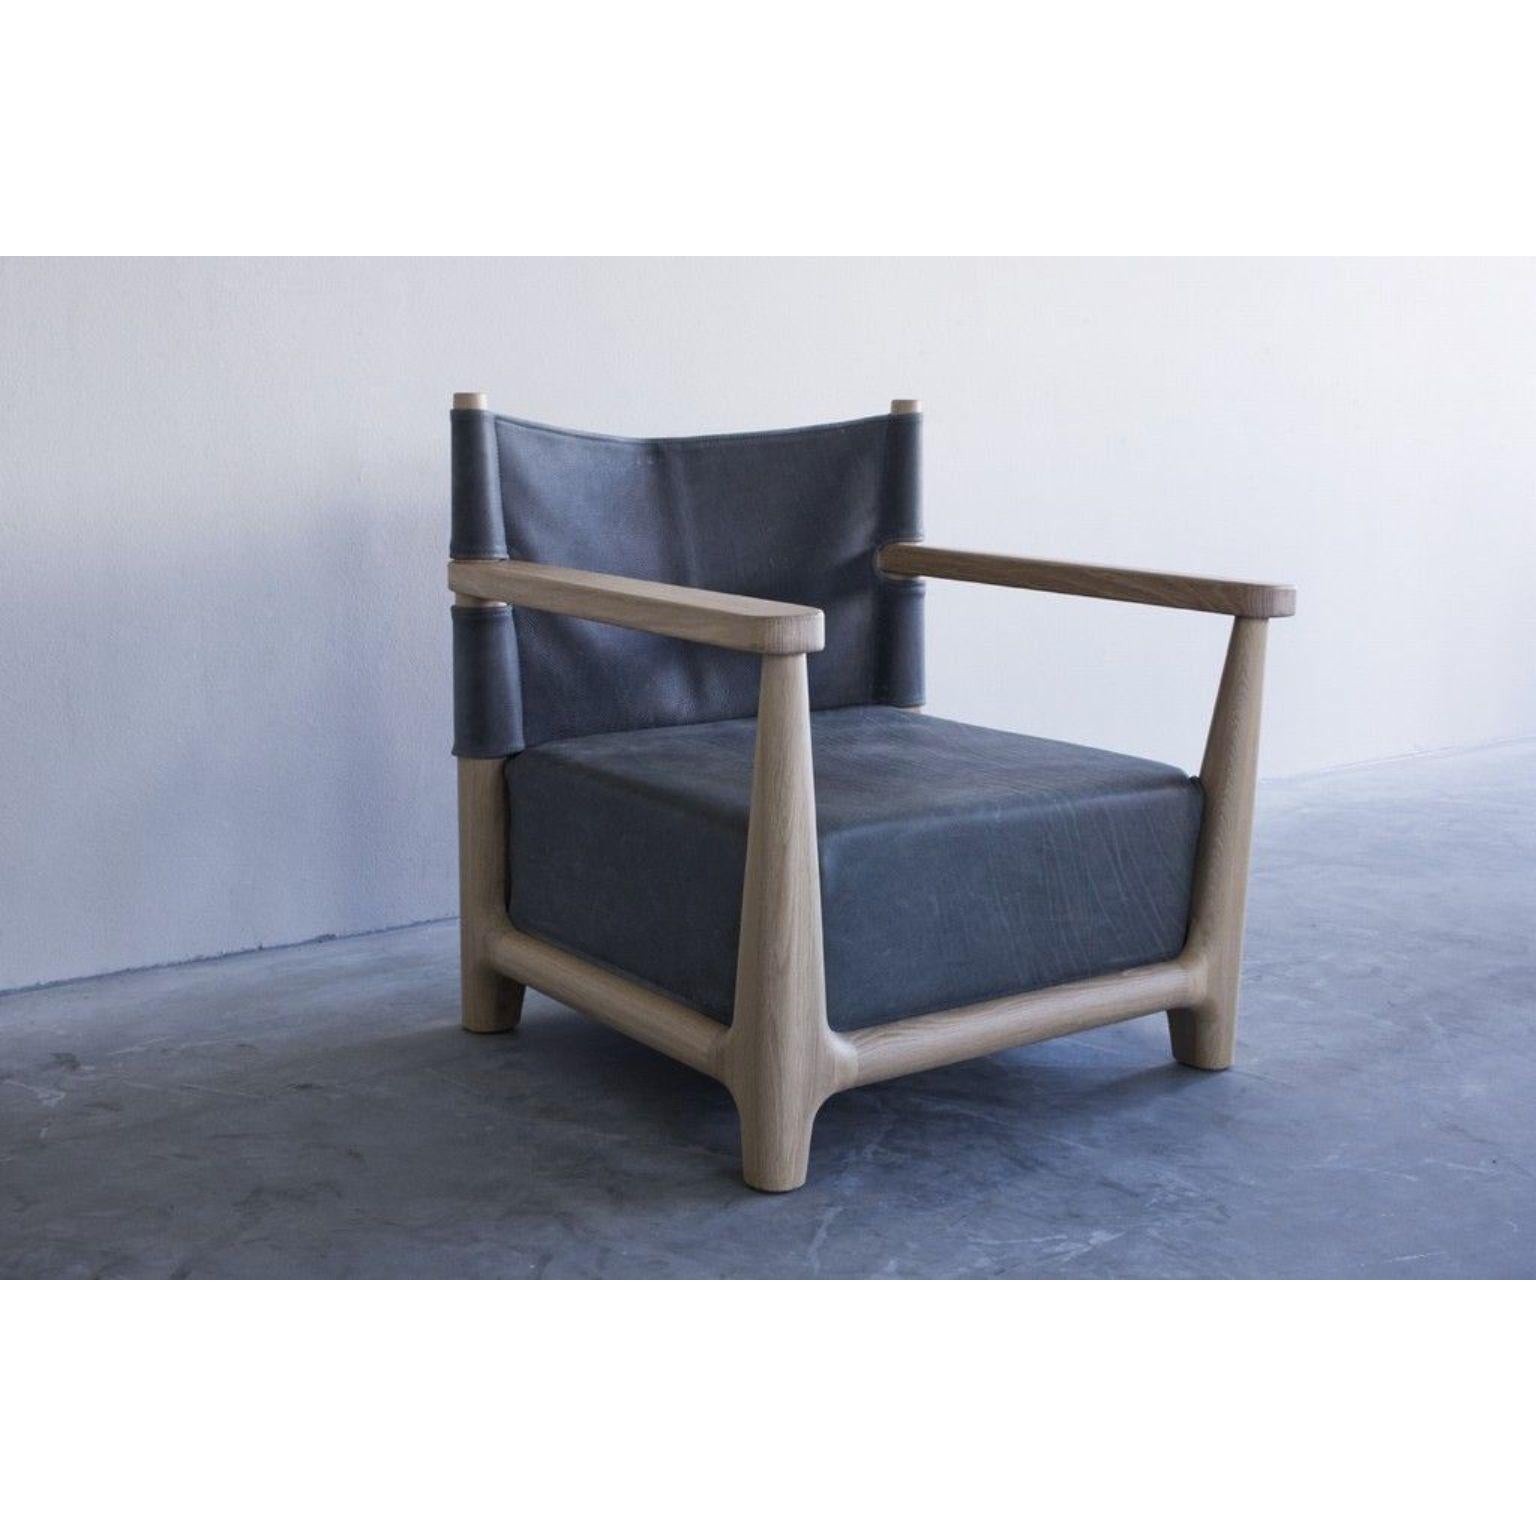 Abi Fauteuil by Van Rossum
Dimensions: D77 x W67 x H76 cm
Materials: Oak, leather.

The wood is available in all standard Van Rossum colors, or in a matching finish to customer’s own sample.
Choose from our leather colors, or send us your own